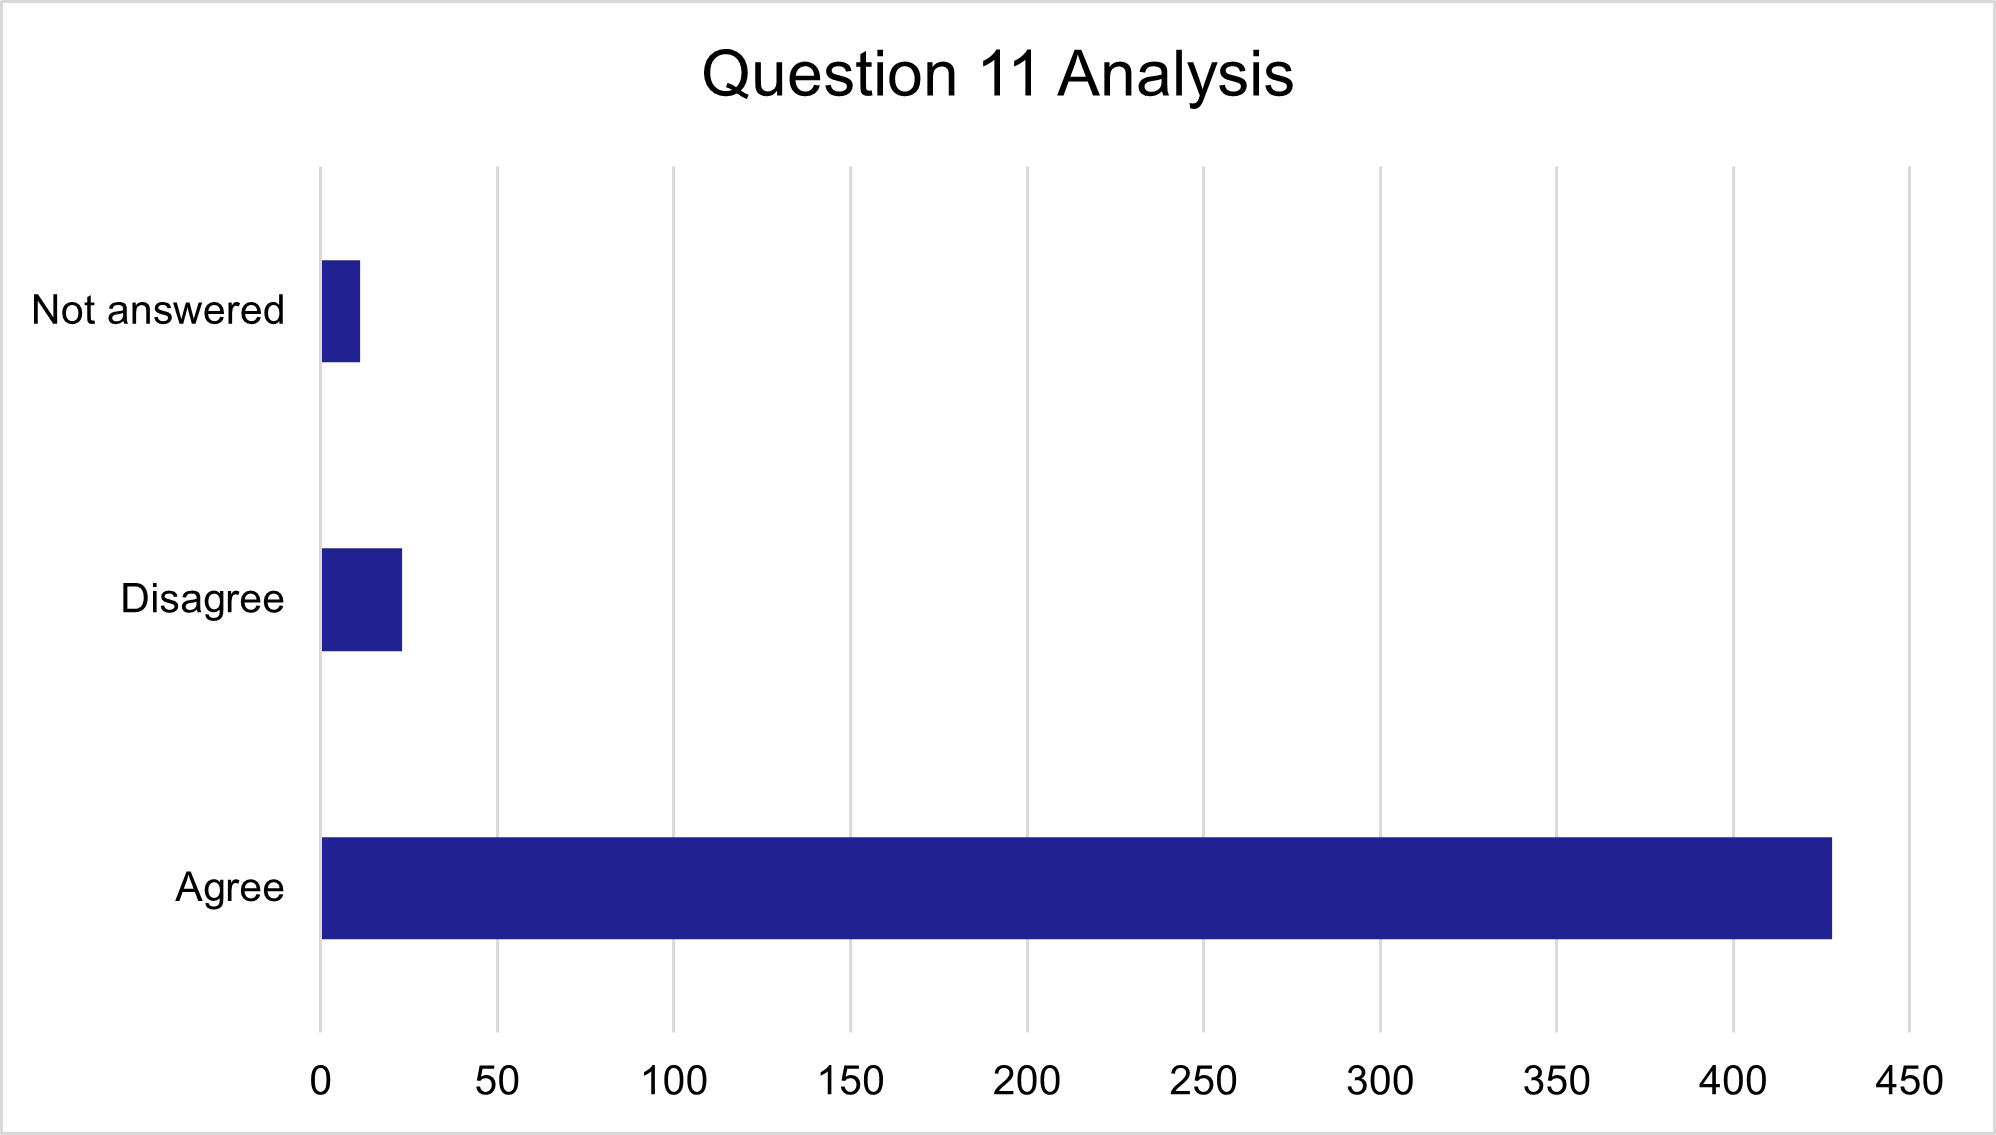 Question 11 responses, as described in text